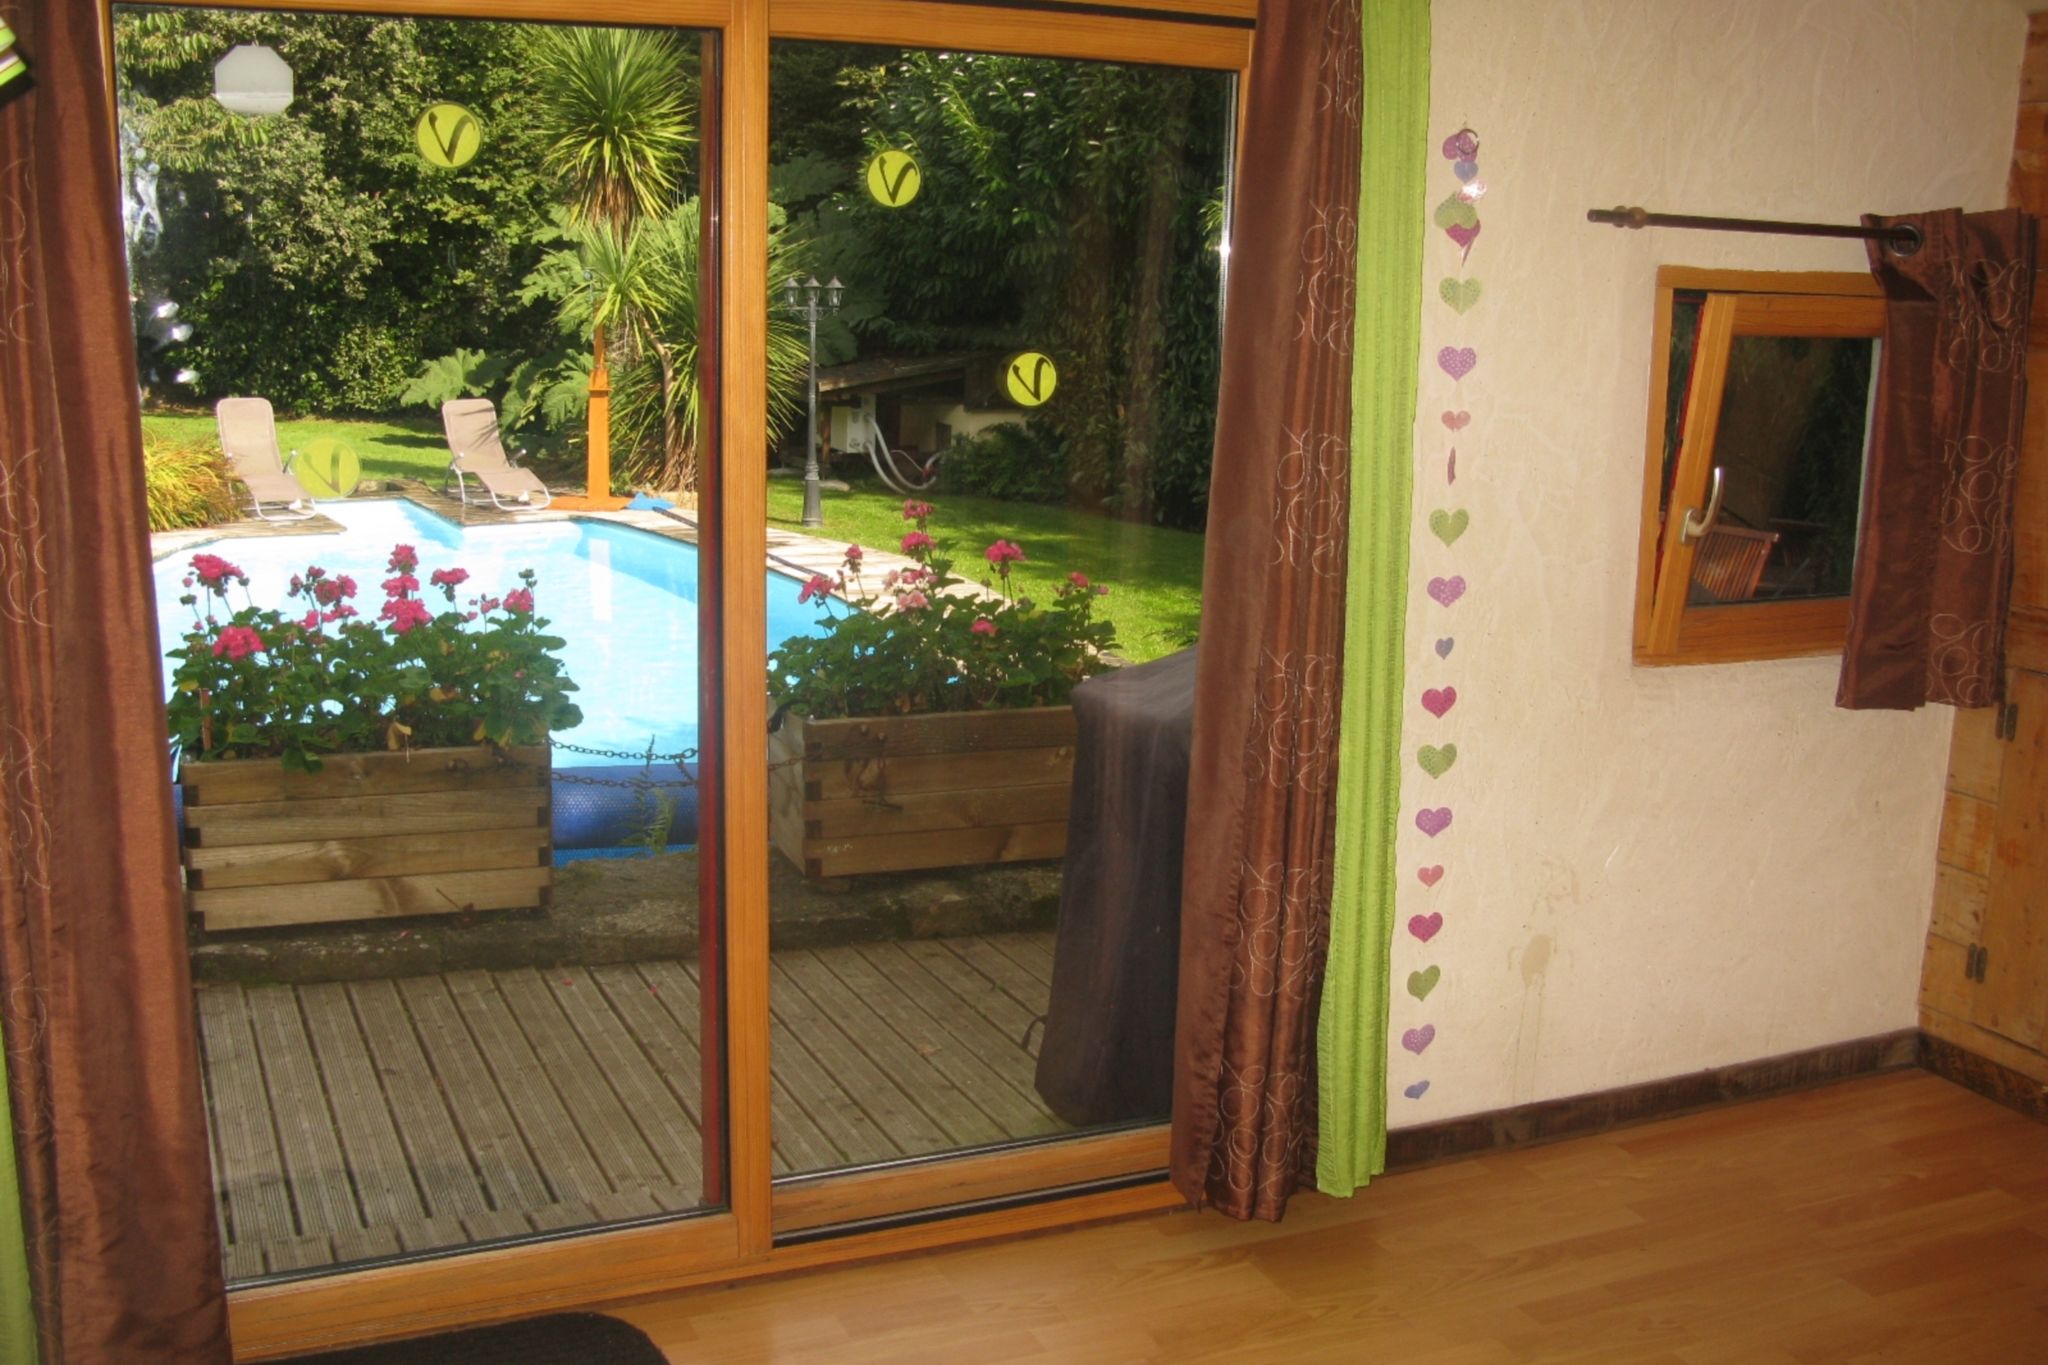 Detached house with a well-maintained enclosed garden with a private swimming pool.